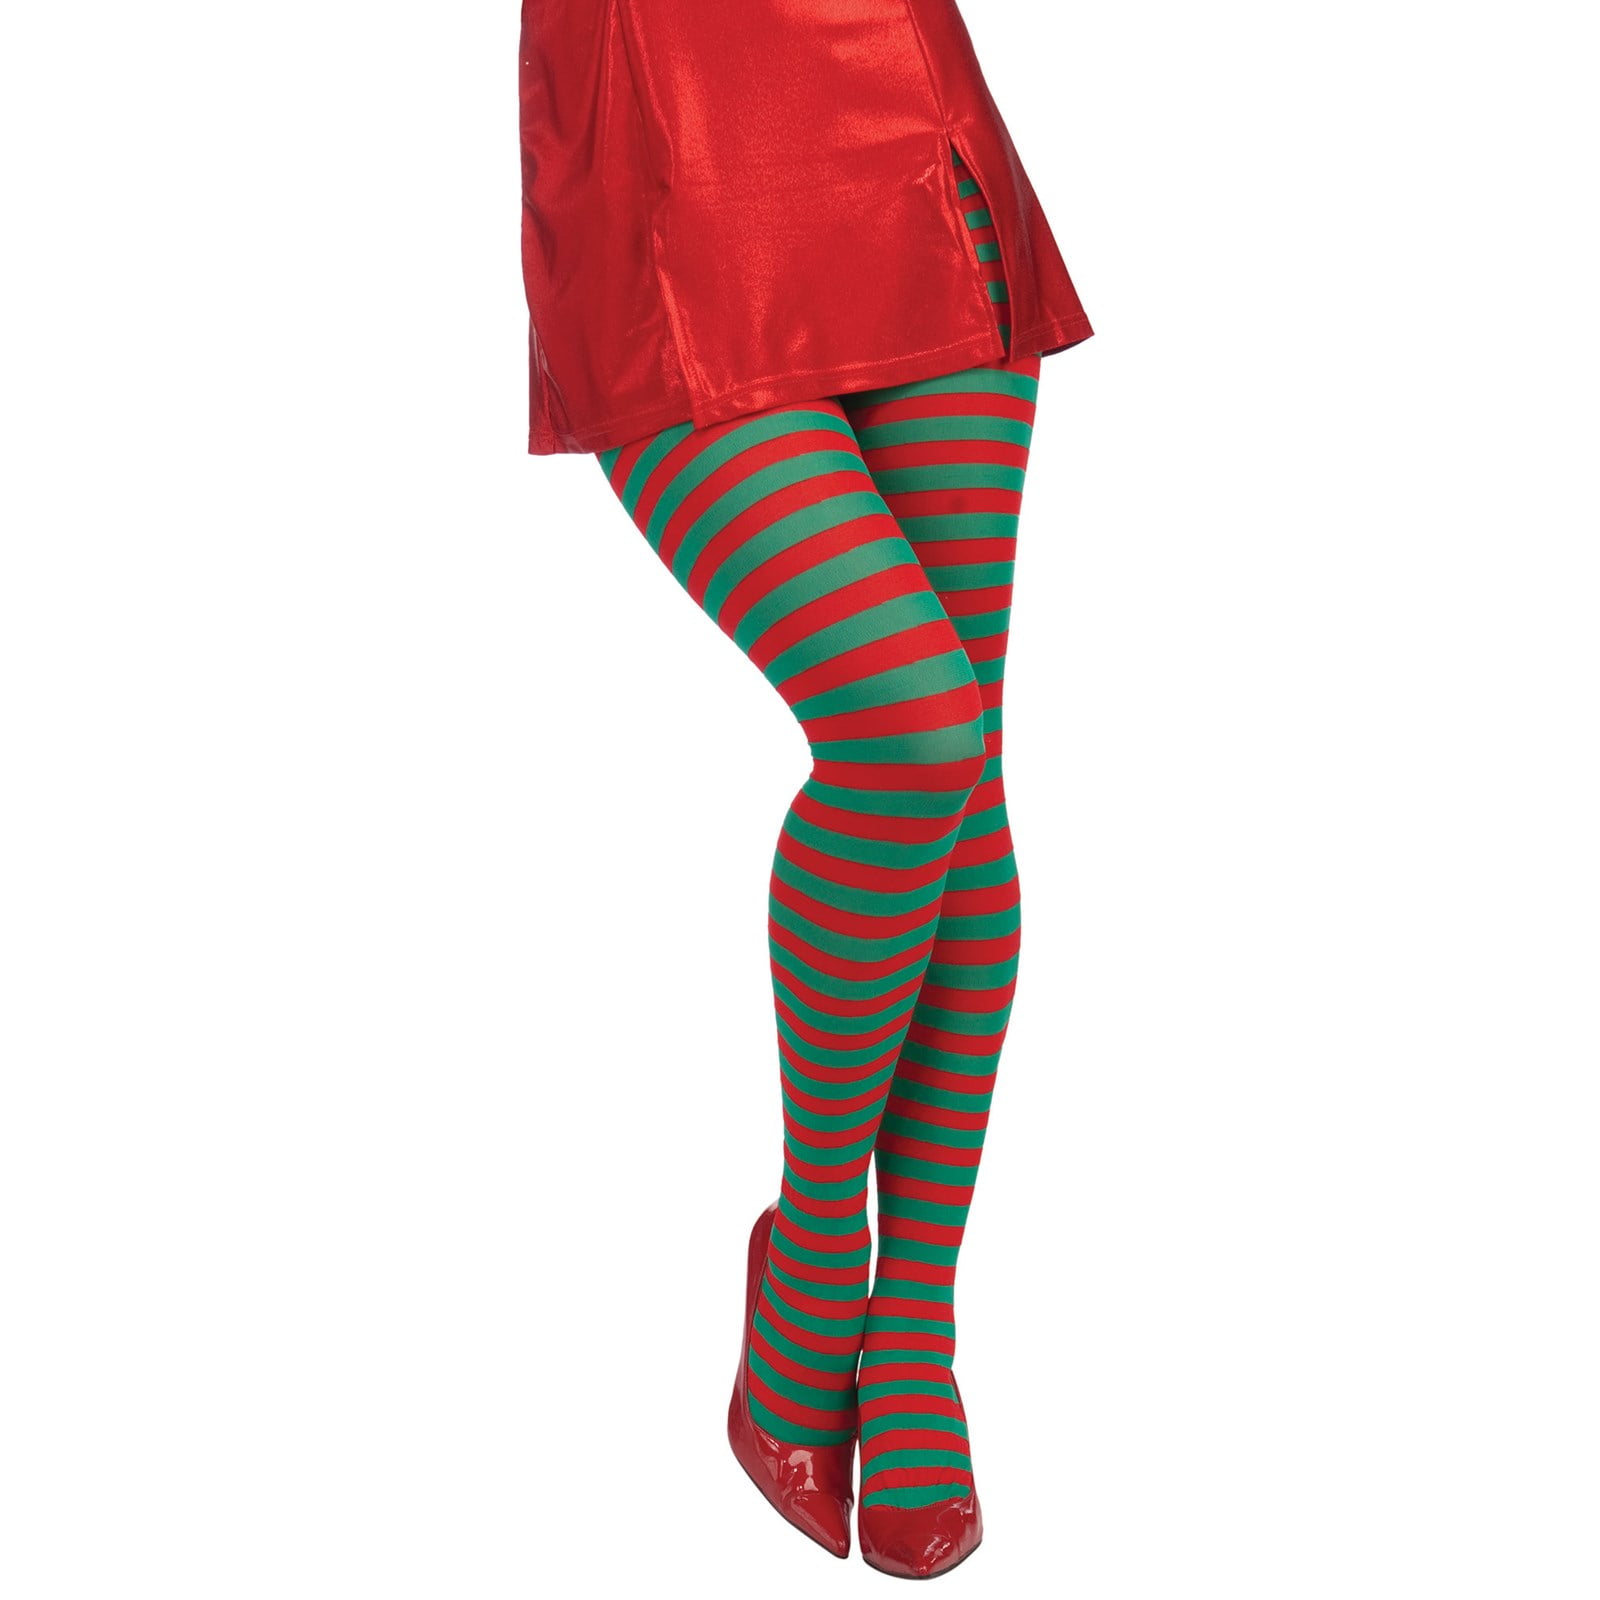 Koitniecer Christmas Striped Tights Full Length Tights Thigh High Stocking for Christmas Costume Accessory